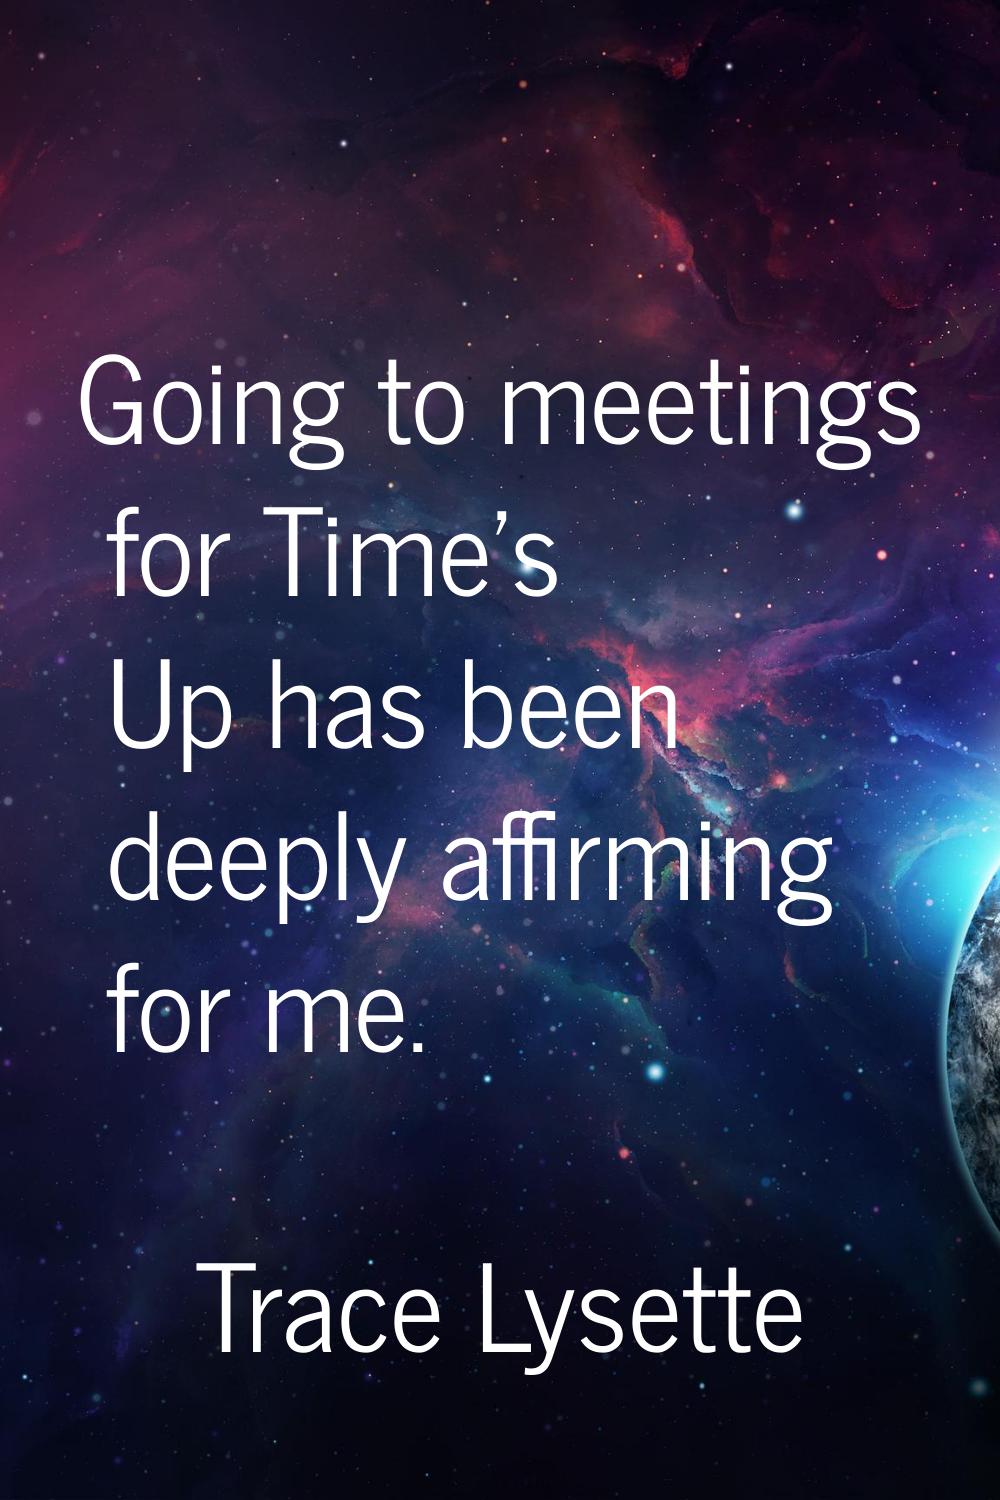 Going to meetings for Time's Up has been deeply affirming for me.